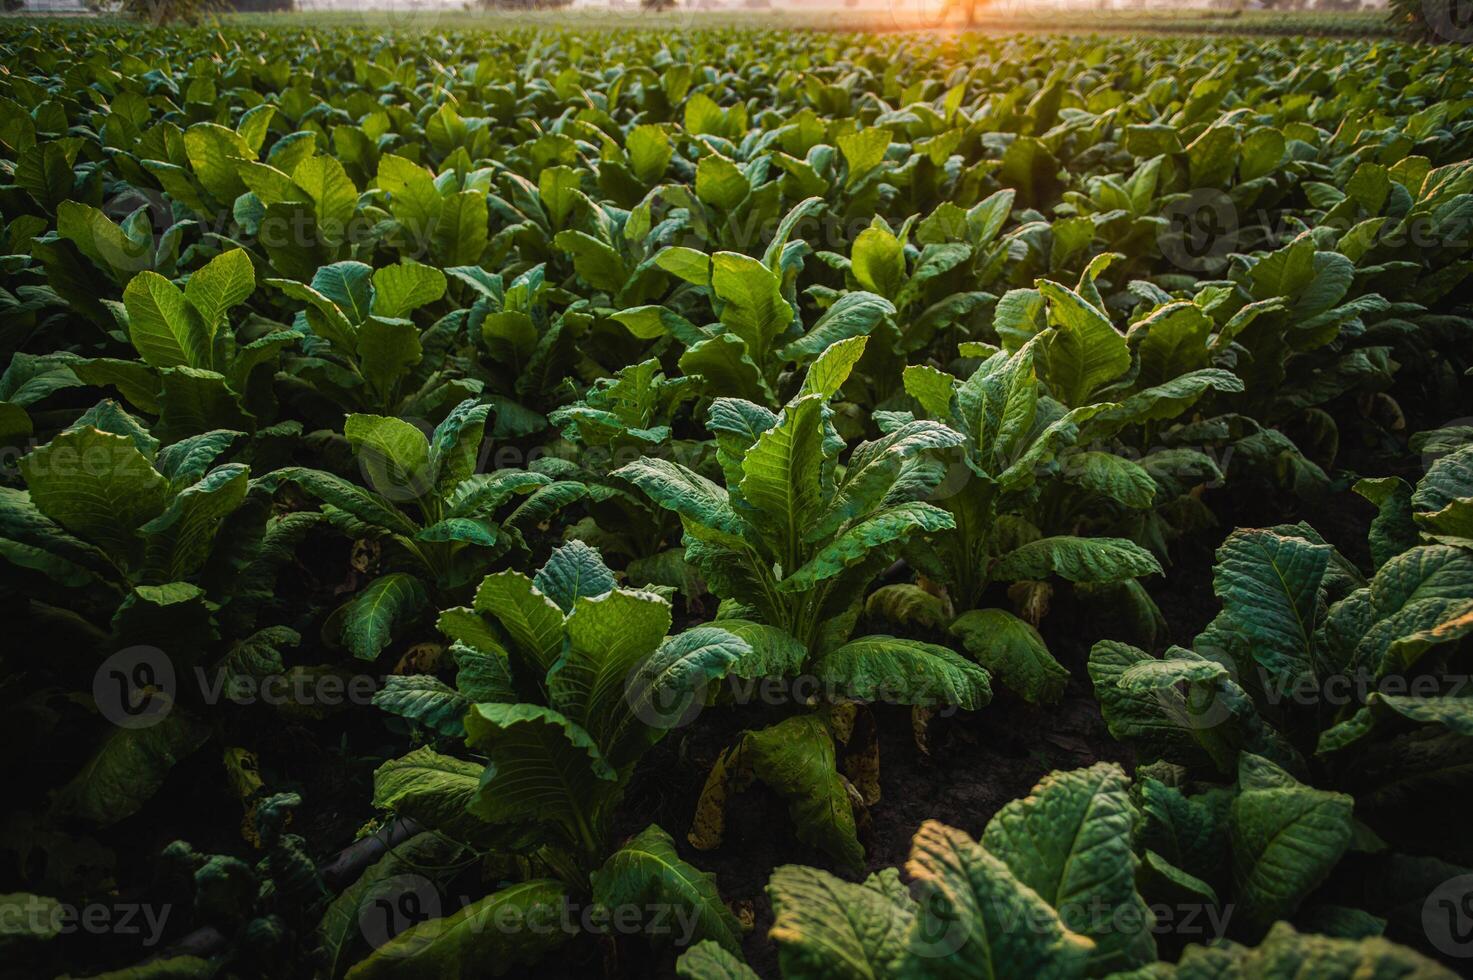 Landscape of tobacco plantation with sunlight on sunset time photo